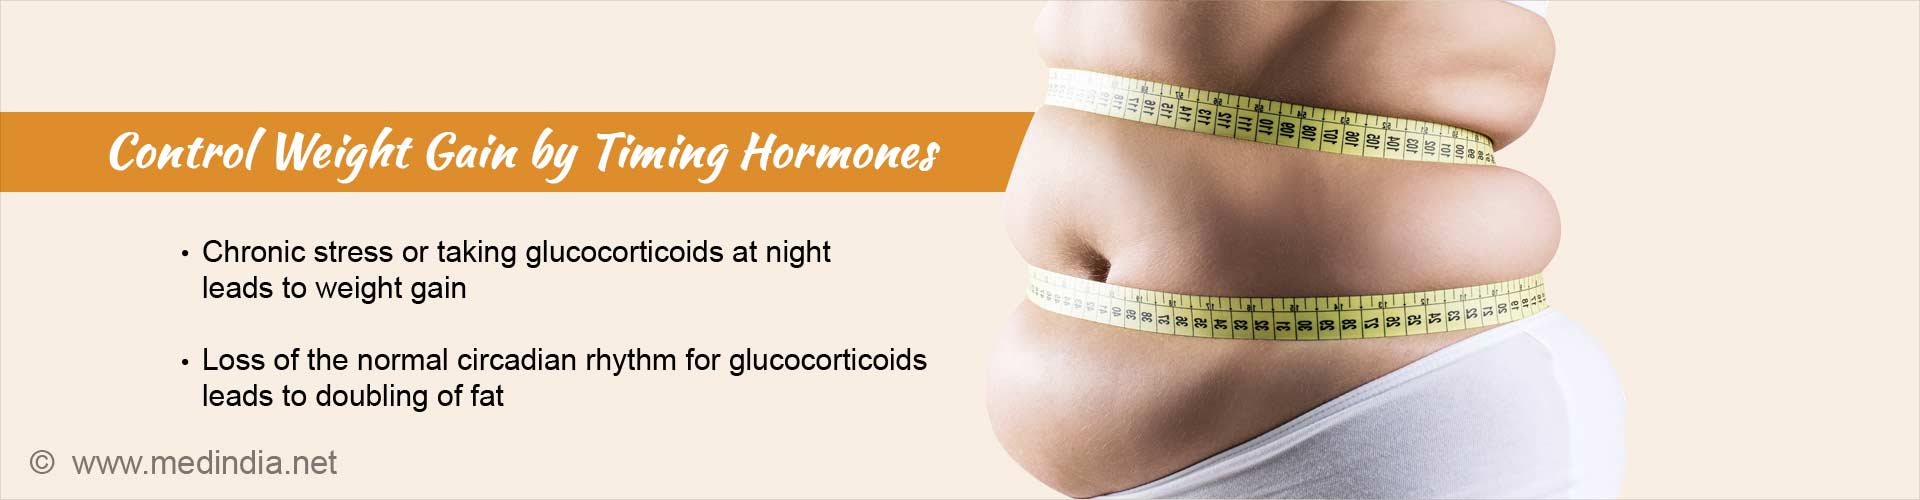 control weight gain by timing hormones
- chronic stress or taking glucocorticoids at night leads to weight gain
- loss of normal circadian rhythm for glucocorticoids leads to doubling of fat